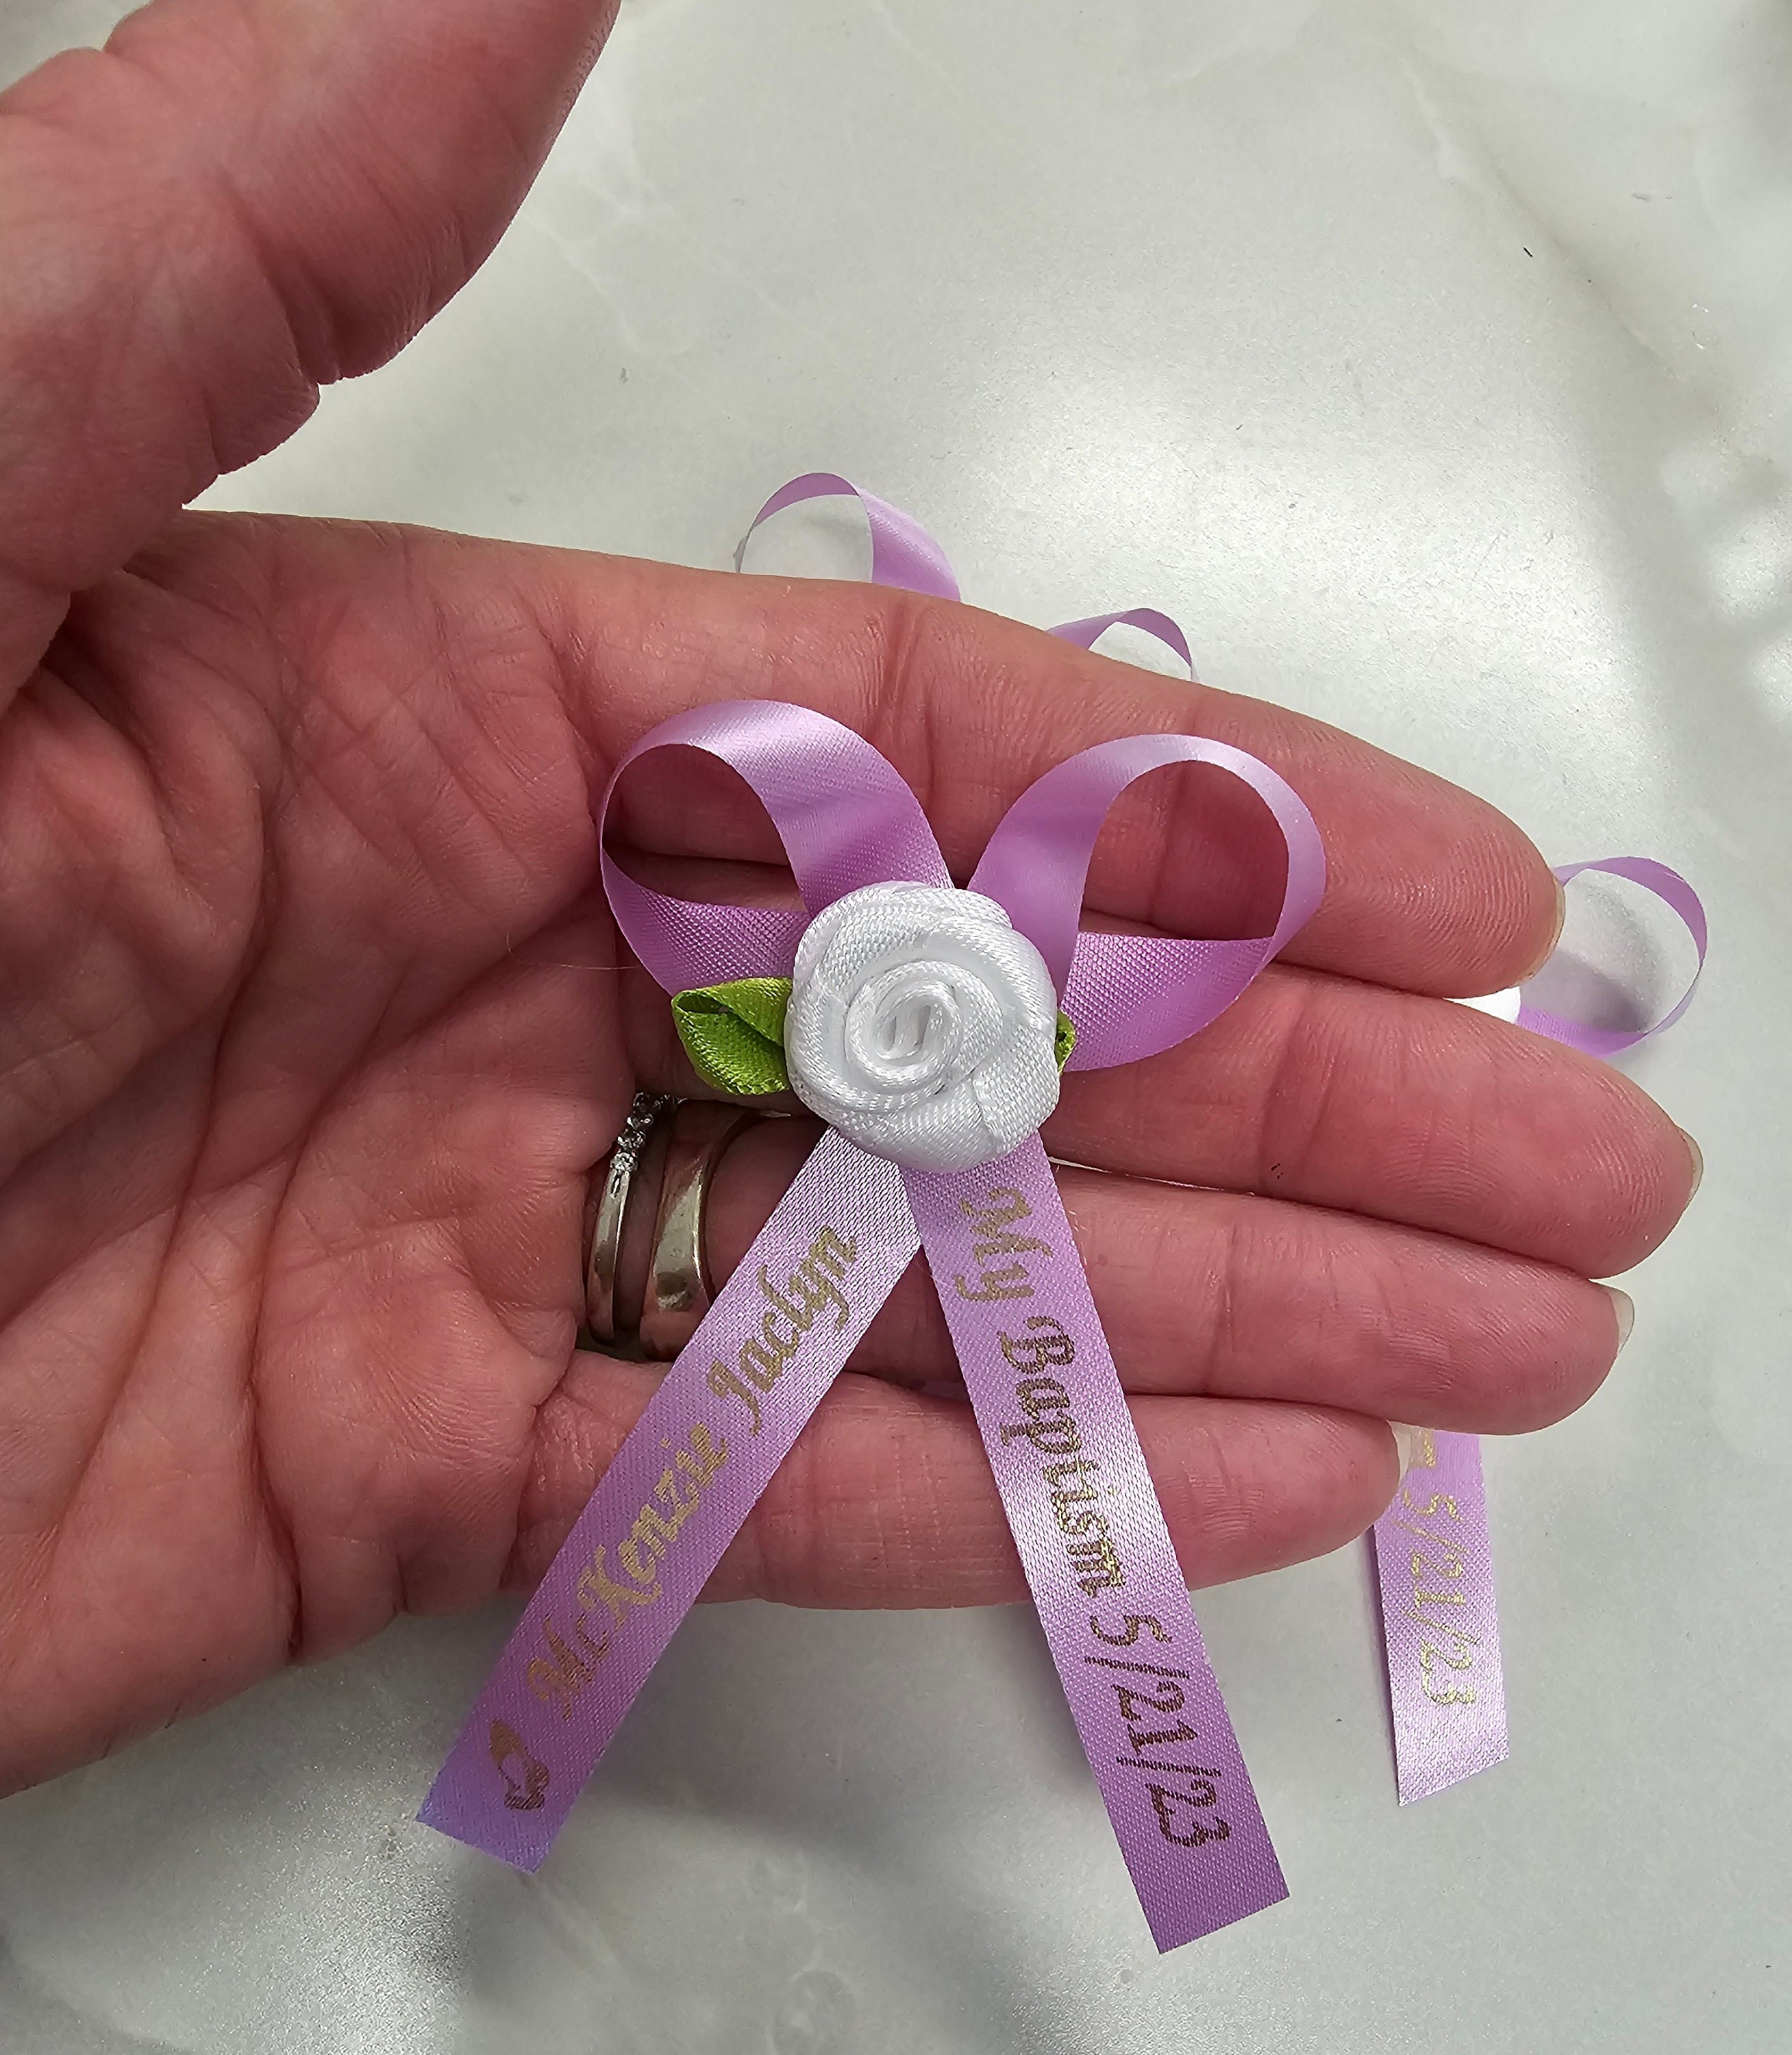 25 Personalized Baby Shower Ribbons for Party Favors or Baby Sprinkle,  Assembled Bows recuerdos para 15 anos quinceaneras listones personalizados